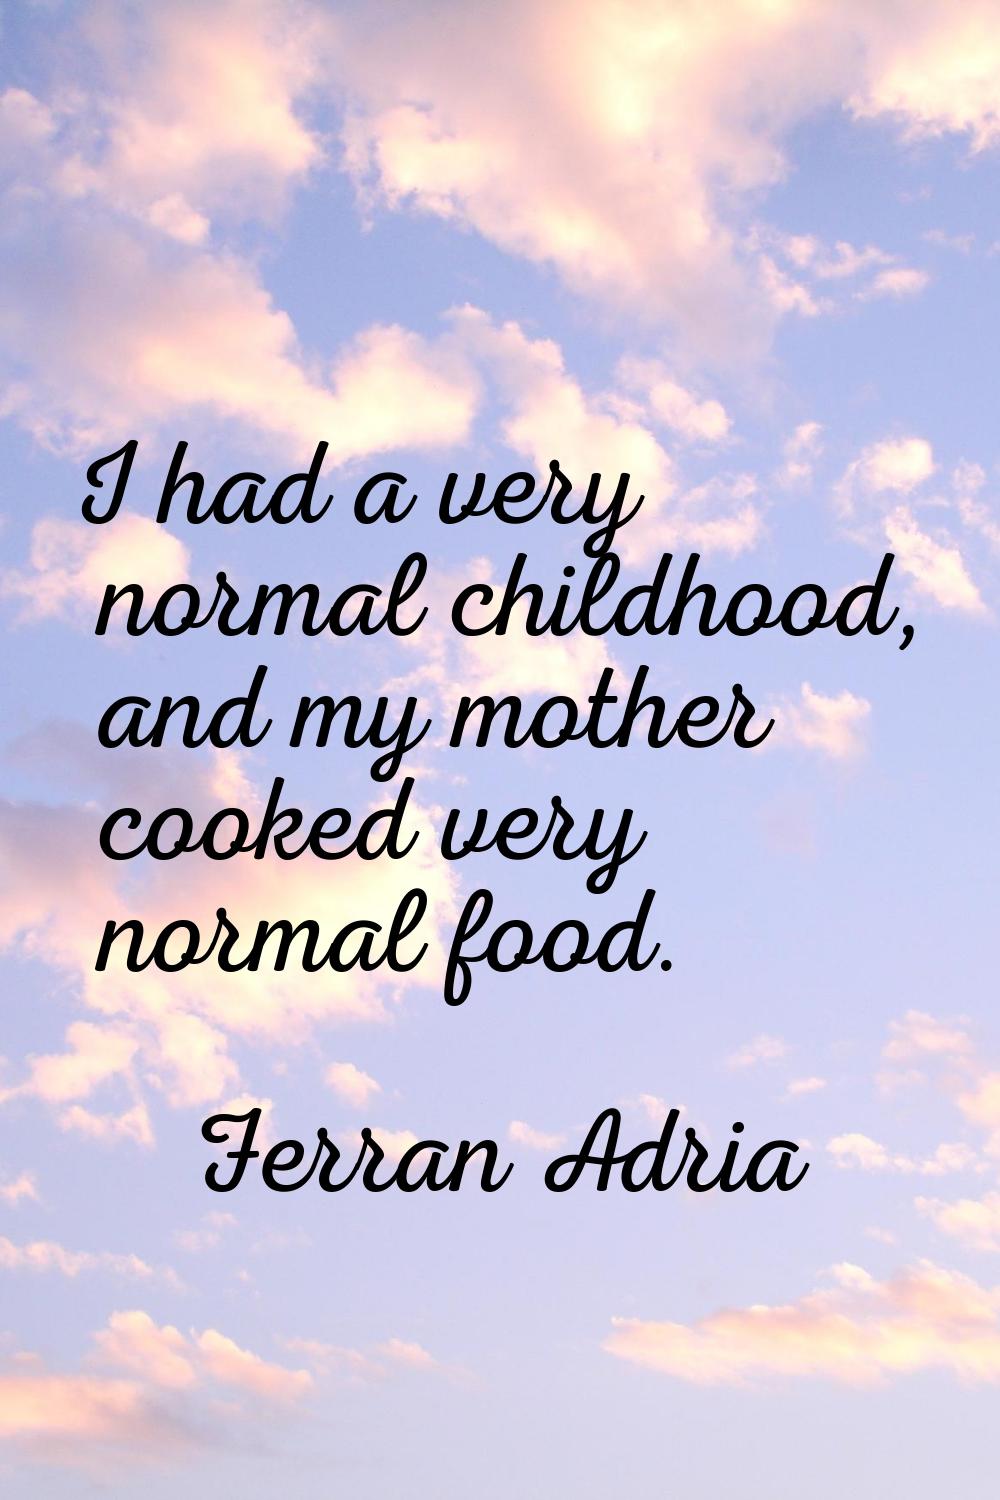 I had a very normal childhood, and my mother cooked very normal food.